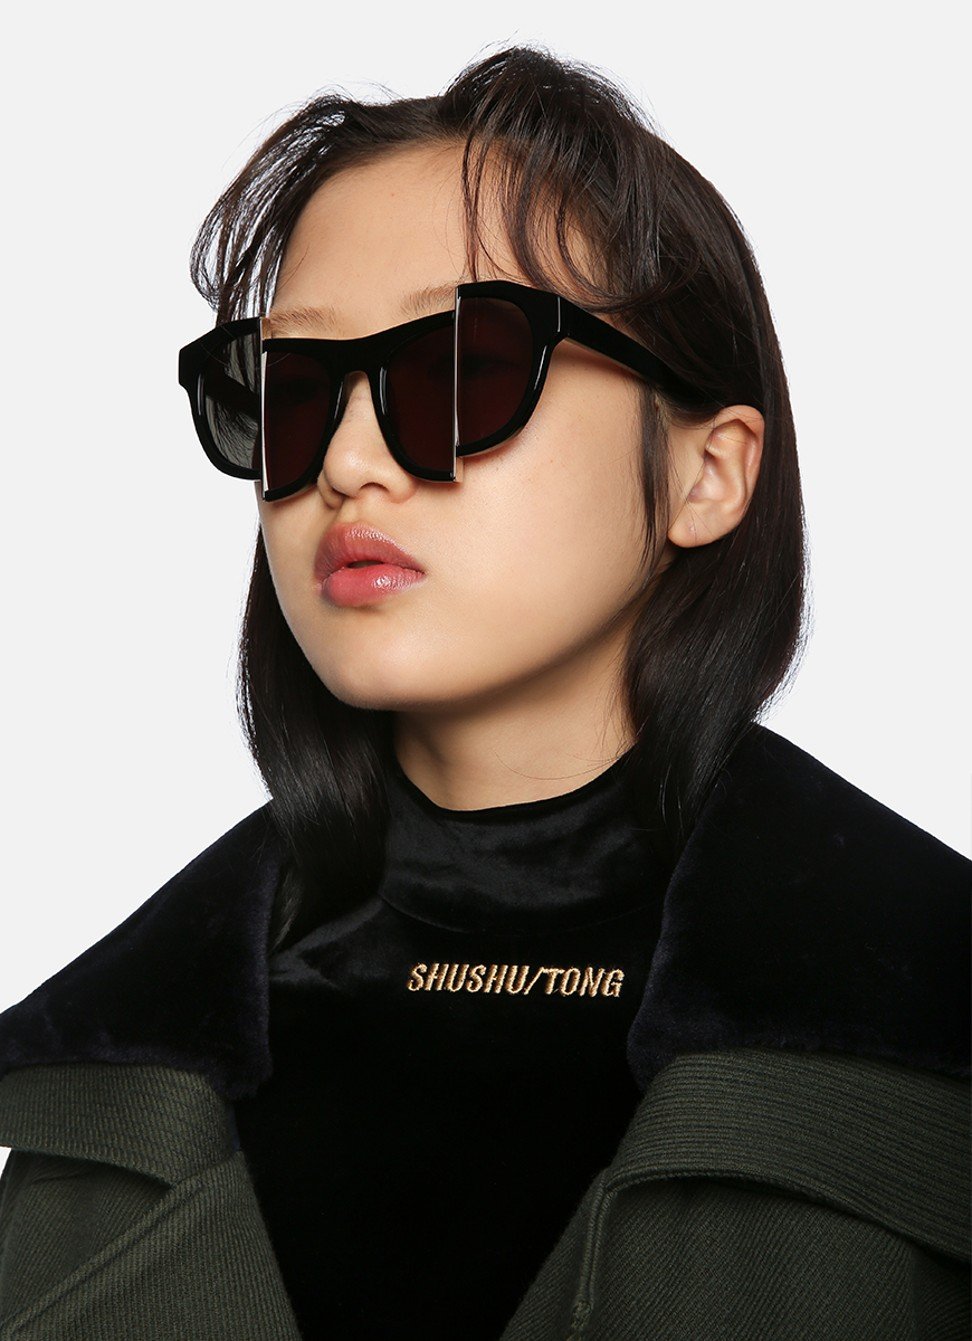 In the China eyewear market, celebrity endorsement can make or break a ...